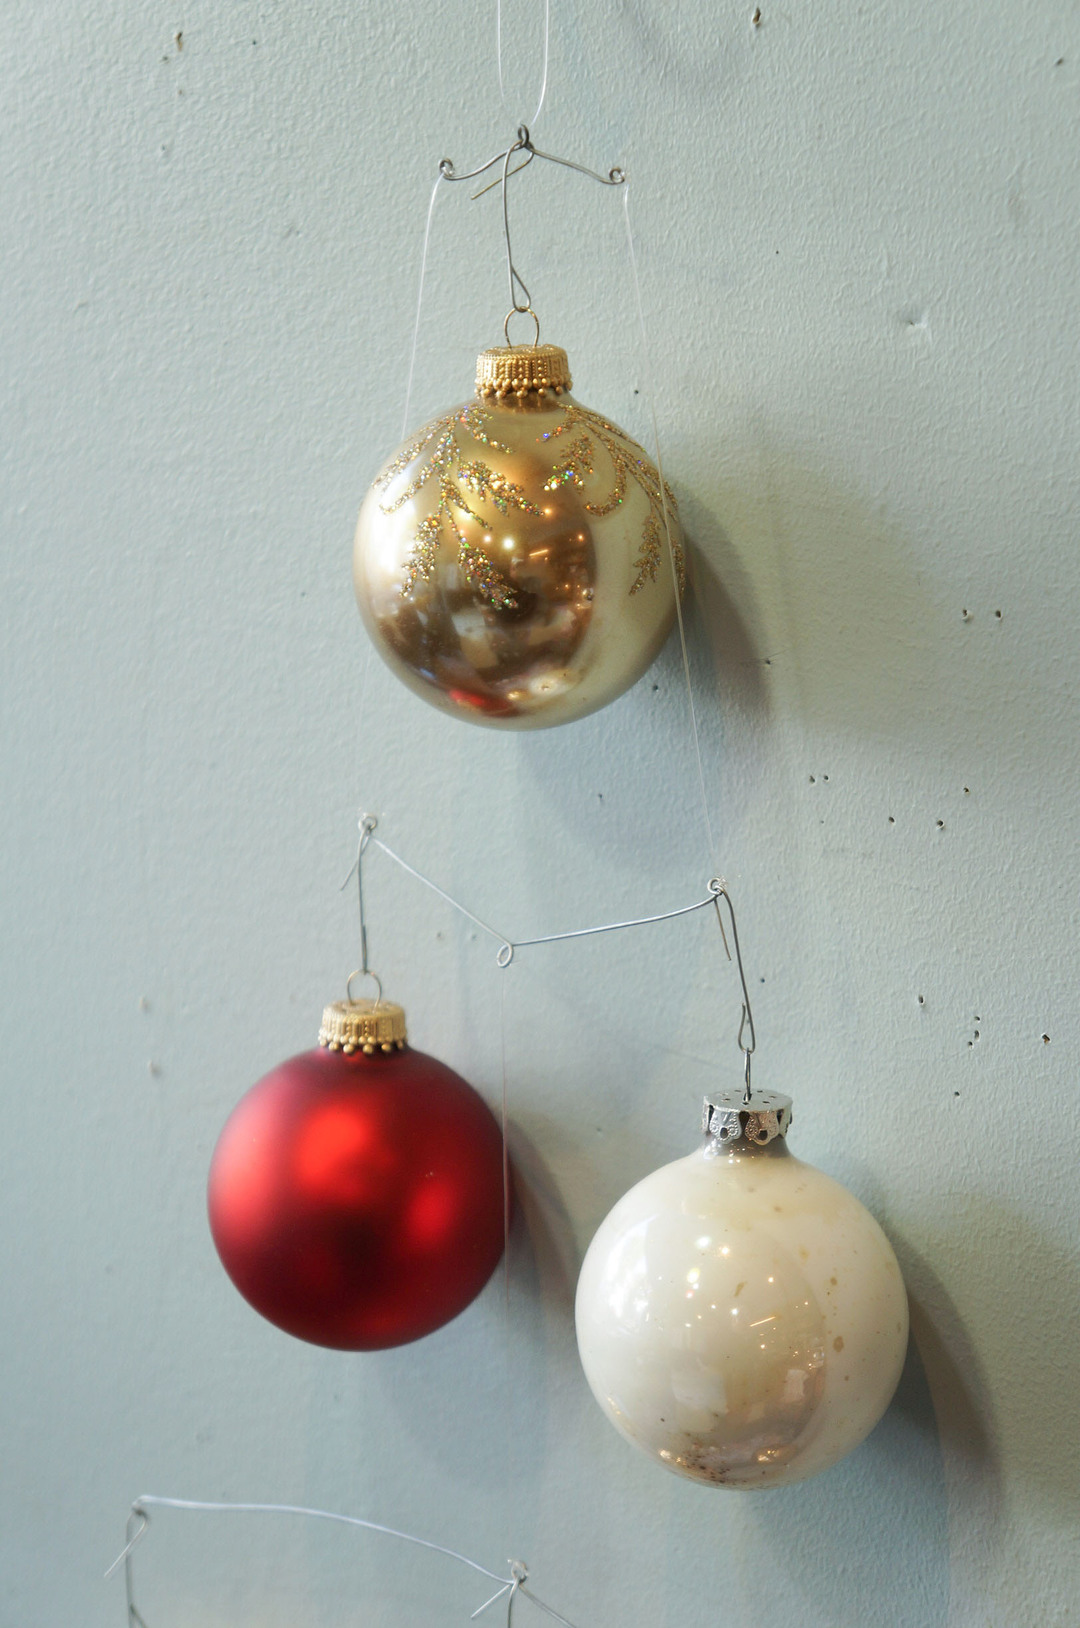 Vintage Blown Glass Christmas Ball Ornament/ヴィンテージ クリスマス オーナメント 吹きガラス ボール レトロ 6個セット 7